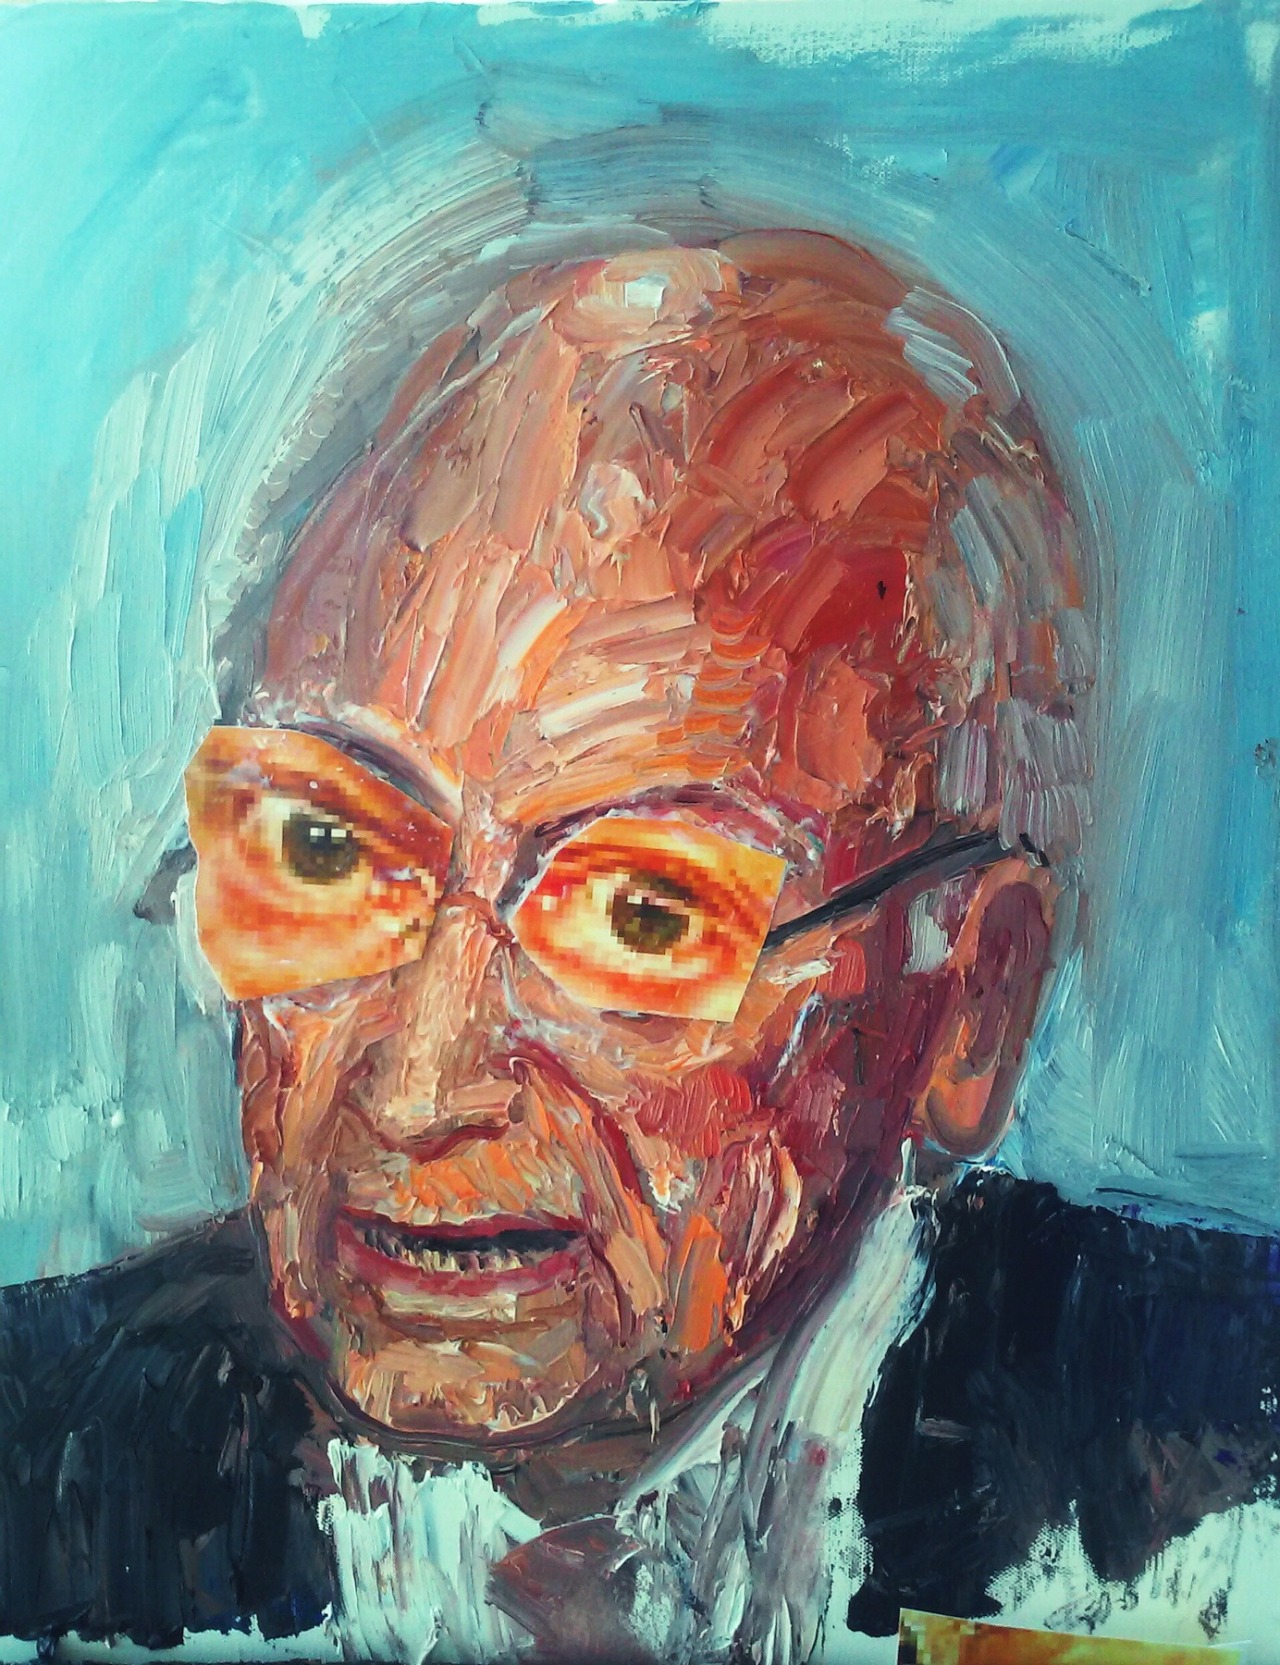 Said the Man with No Heart, “I’d Do it Again in a Heartbeat”16x20 Oil on canvas, Sandra Koponen © 2015OFFICE OF THE VICE PRESIDENTDick Cheney, Vice President Jan. 20, 2001 - Jan. 20, 2009Vice President Cheney has been the most vocal and unapologetic supporter of the Bush administration&rsquo;s torture program from the beginning, and he appears to have had a hand in virtually every aspect of it. He opposed the application of the Geneva Conventions to U.S. detentions and interrogations overseas, a legal sidestep that set the stage for future torture. As a member of the National Security Council Principal Committee, Cheney received detailed briefings on the specific interrogation techniques that the CIA wanted to use on so-called &ldquo;high value&rdquo; detainees, and he approved them. Through his legal counsel, David Addington, Cheney also helped shape the legal memos used to justify torture.Cheney sought unsuccessfully to ensure CIA agents would be immunized from legal liability for abusing detainees. However, his effort did lead to the inclusion in the Detainee Treatment Act of 2005 of a provision under which officials may claim they did not know particular practices were unlawful, including through &ldquo;good faith&rdquo; reliance on legal advice. Cheney continued to defend and maintained his pro-torture positions despite mounting internal and public reports of abuses and deaths of detainees in DOD and CIA custody.**https://www.aclu.org/infographic/infographic-torture-architects